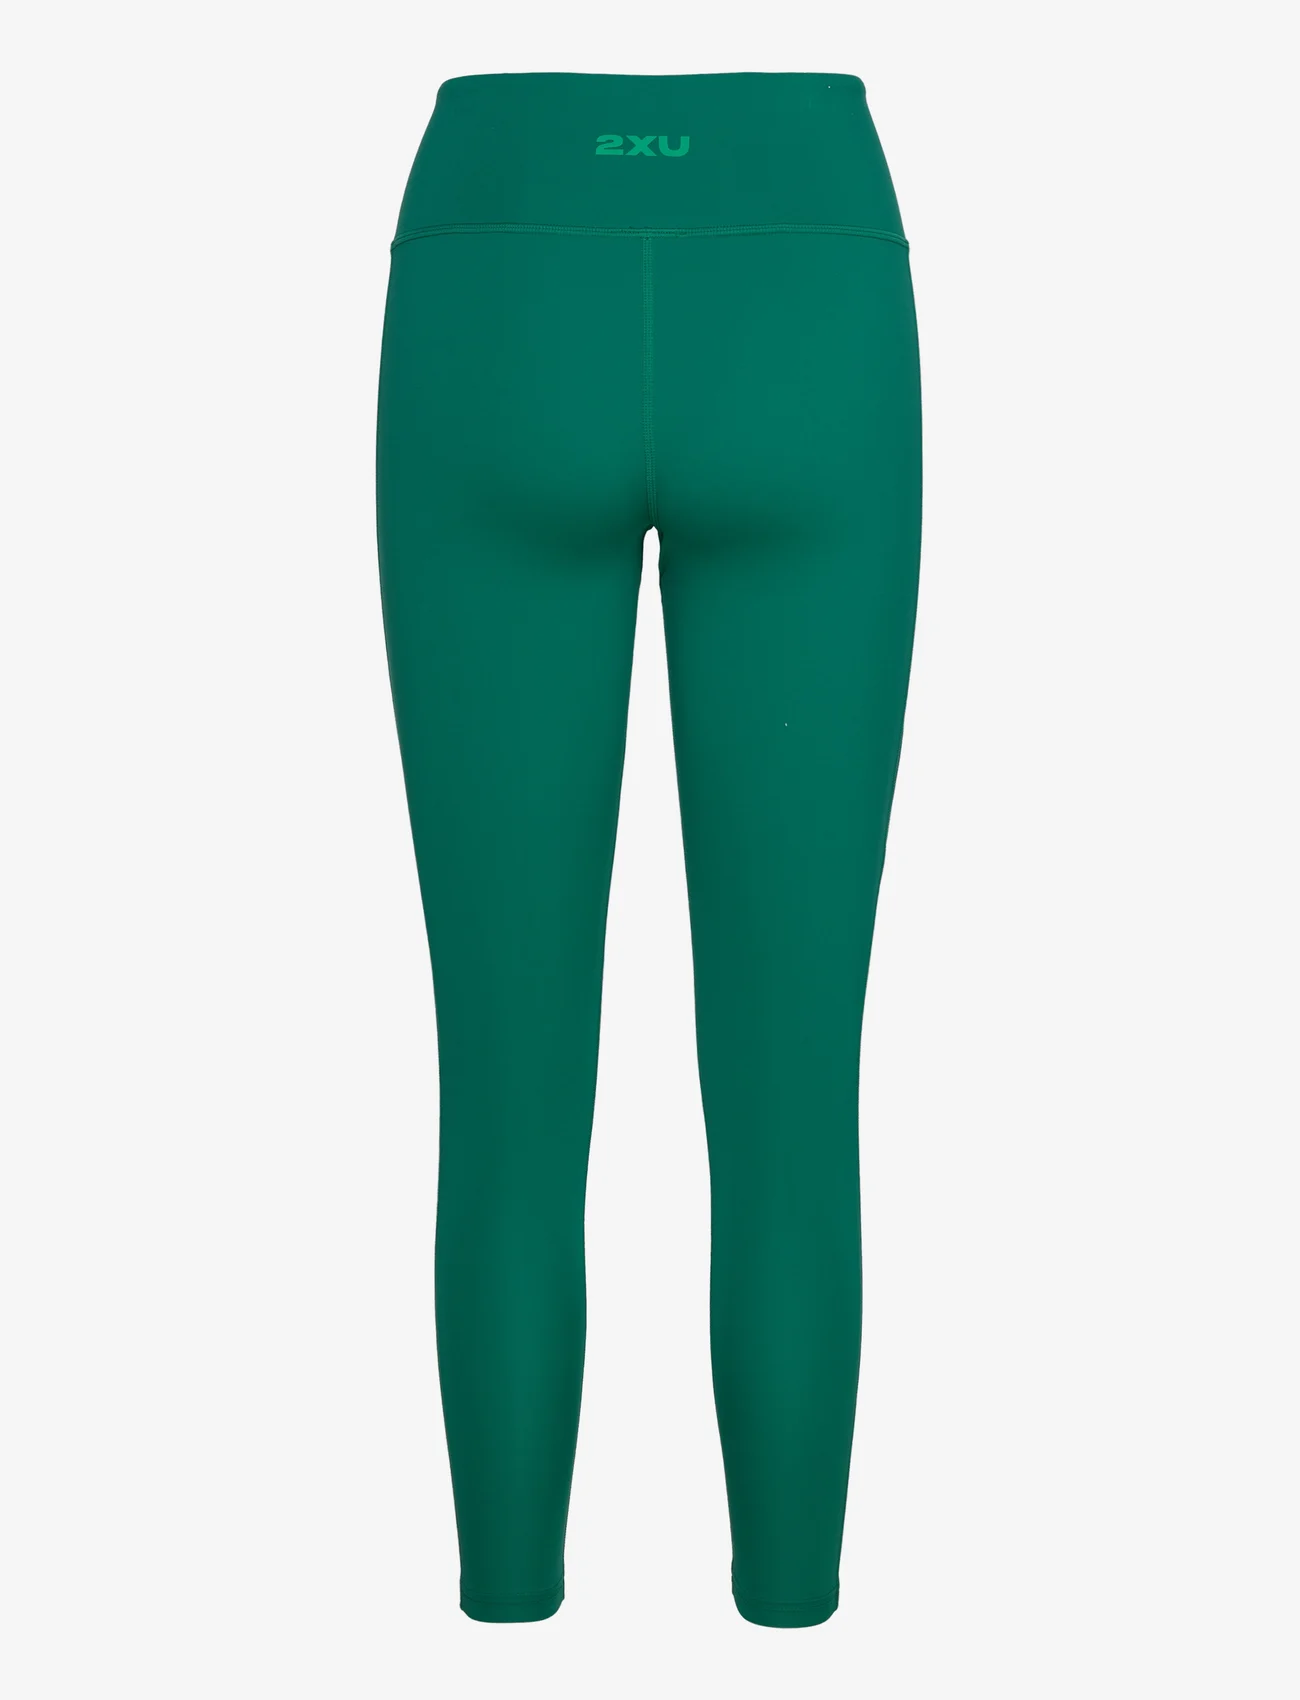 2XU - FORM HI-RISE COMP TIGHTS - lauf-& trainingstights - forest green/forest green - 1